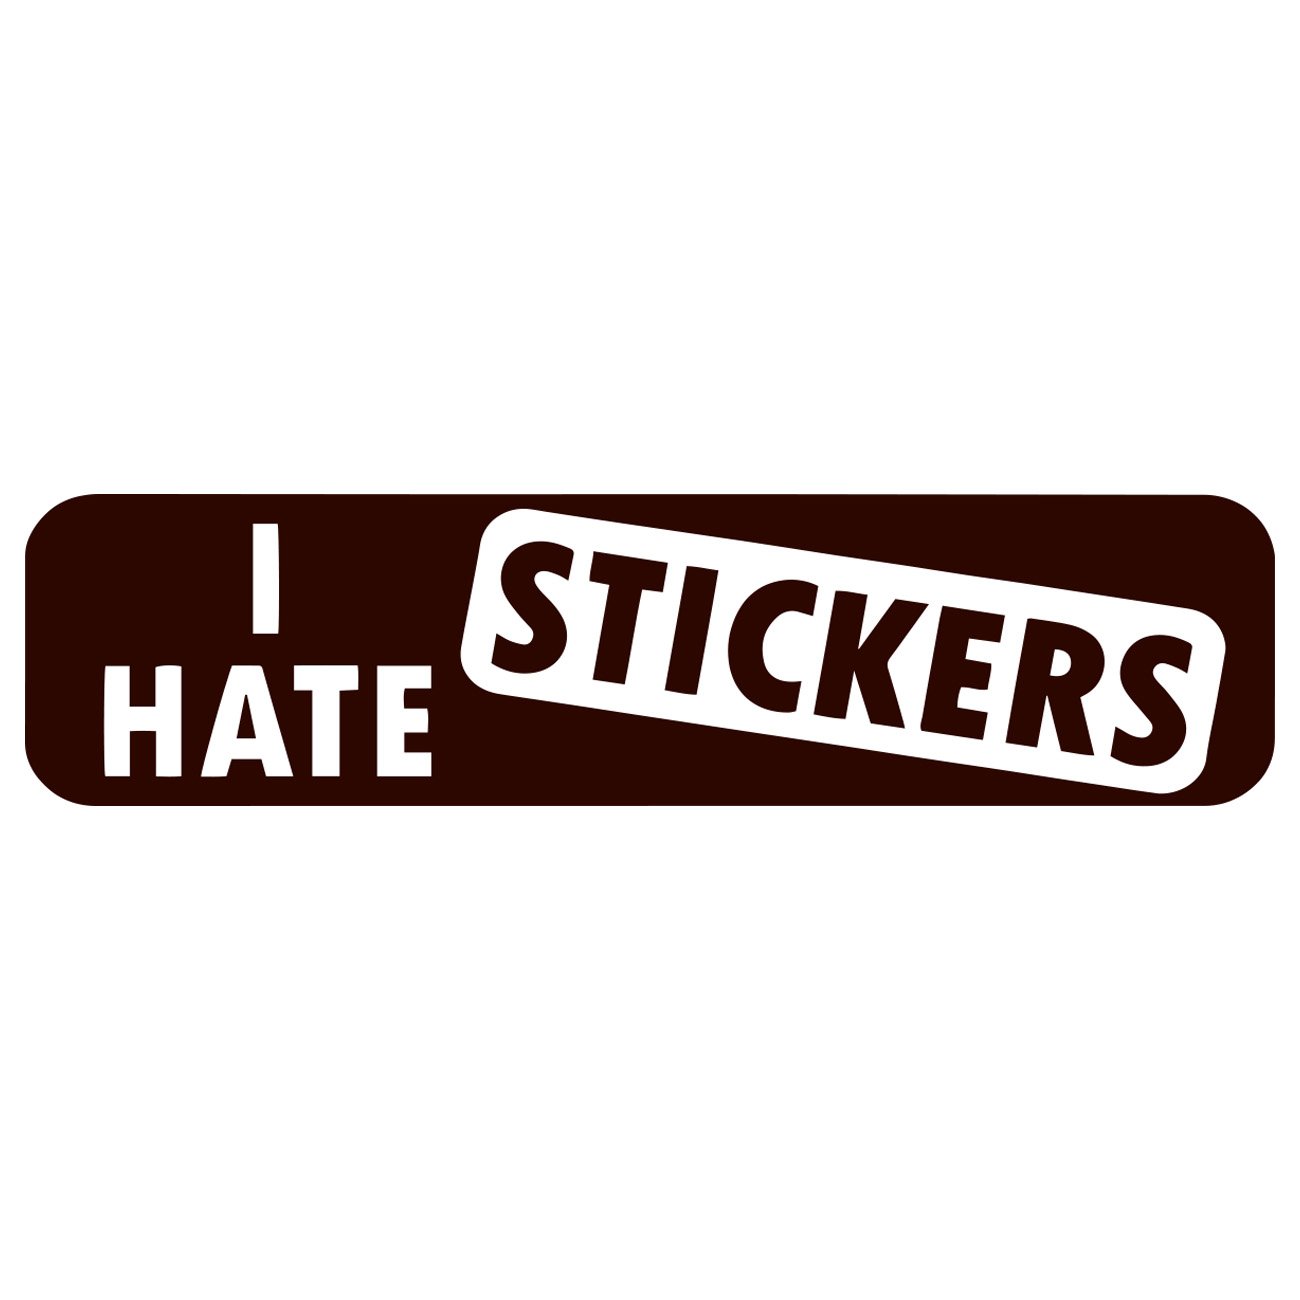 I hate stickers